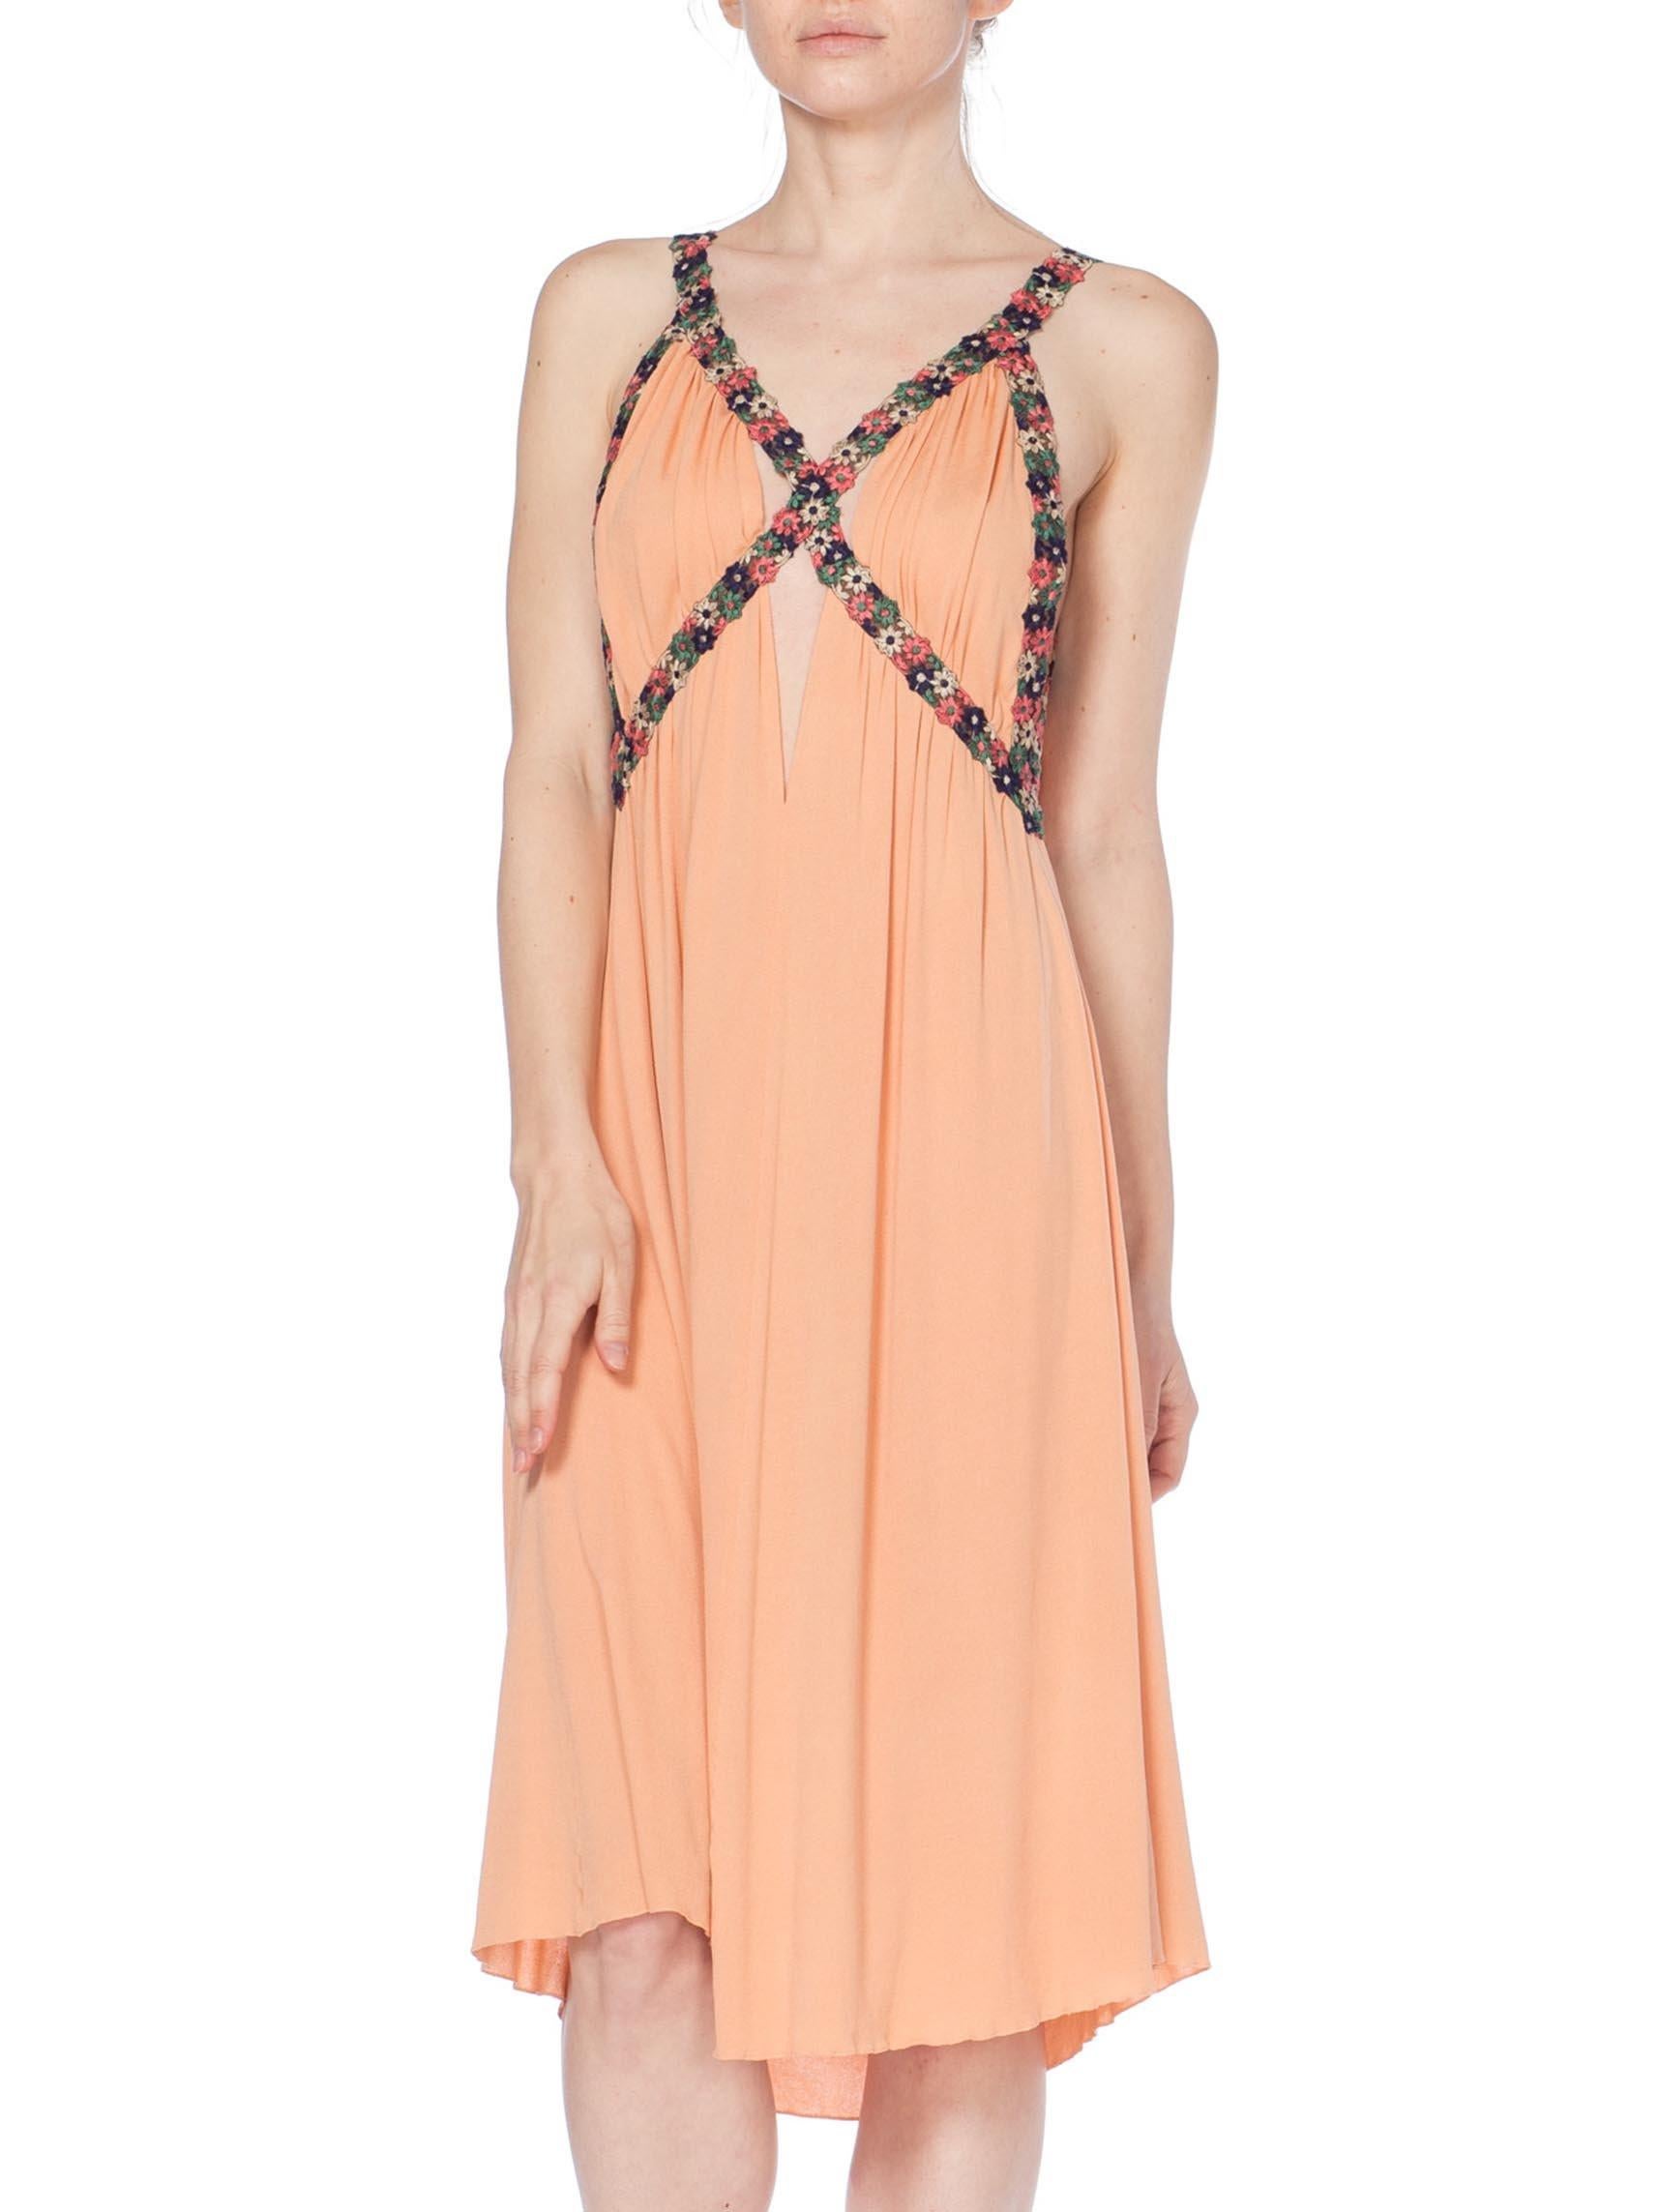 Orange MORPHEW COLLECTION Peach Silk Jersey Dress With Cutout Front & 1930S Floral Trim For Sale